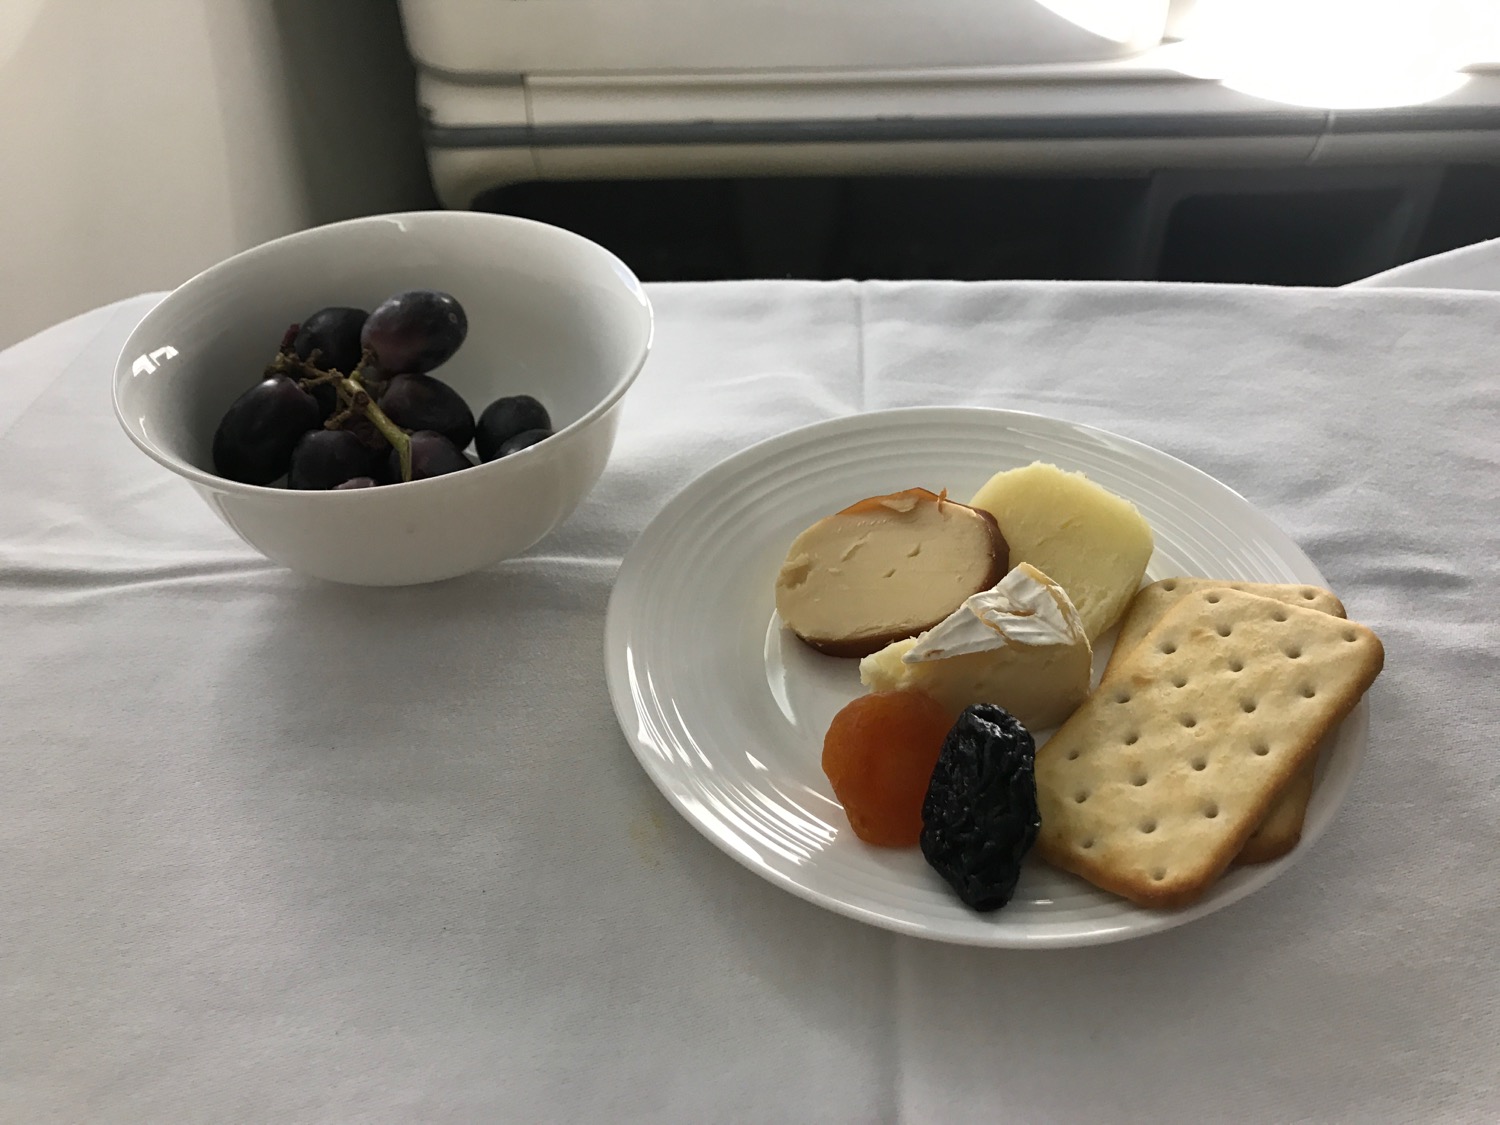 a plate of food and a bowl of grapes